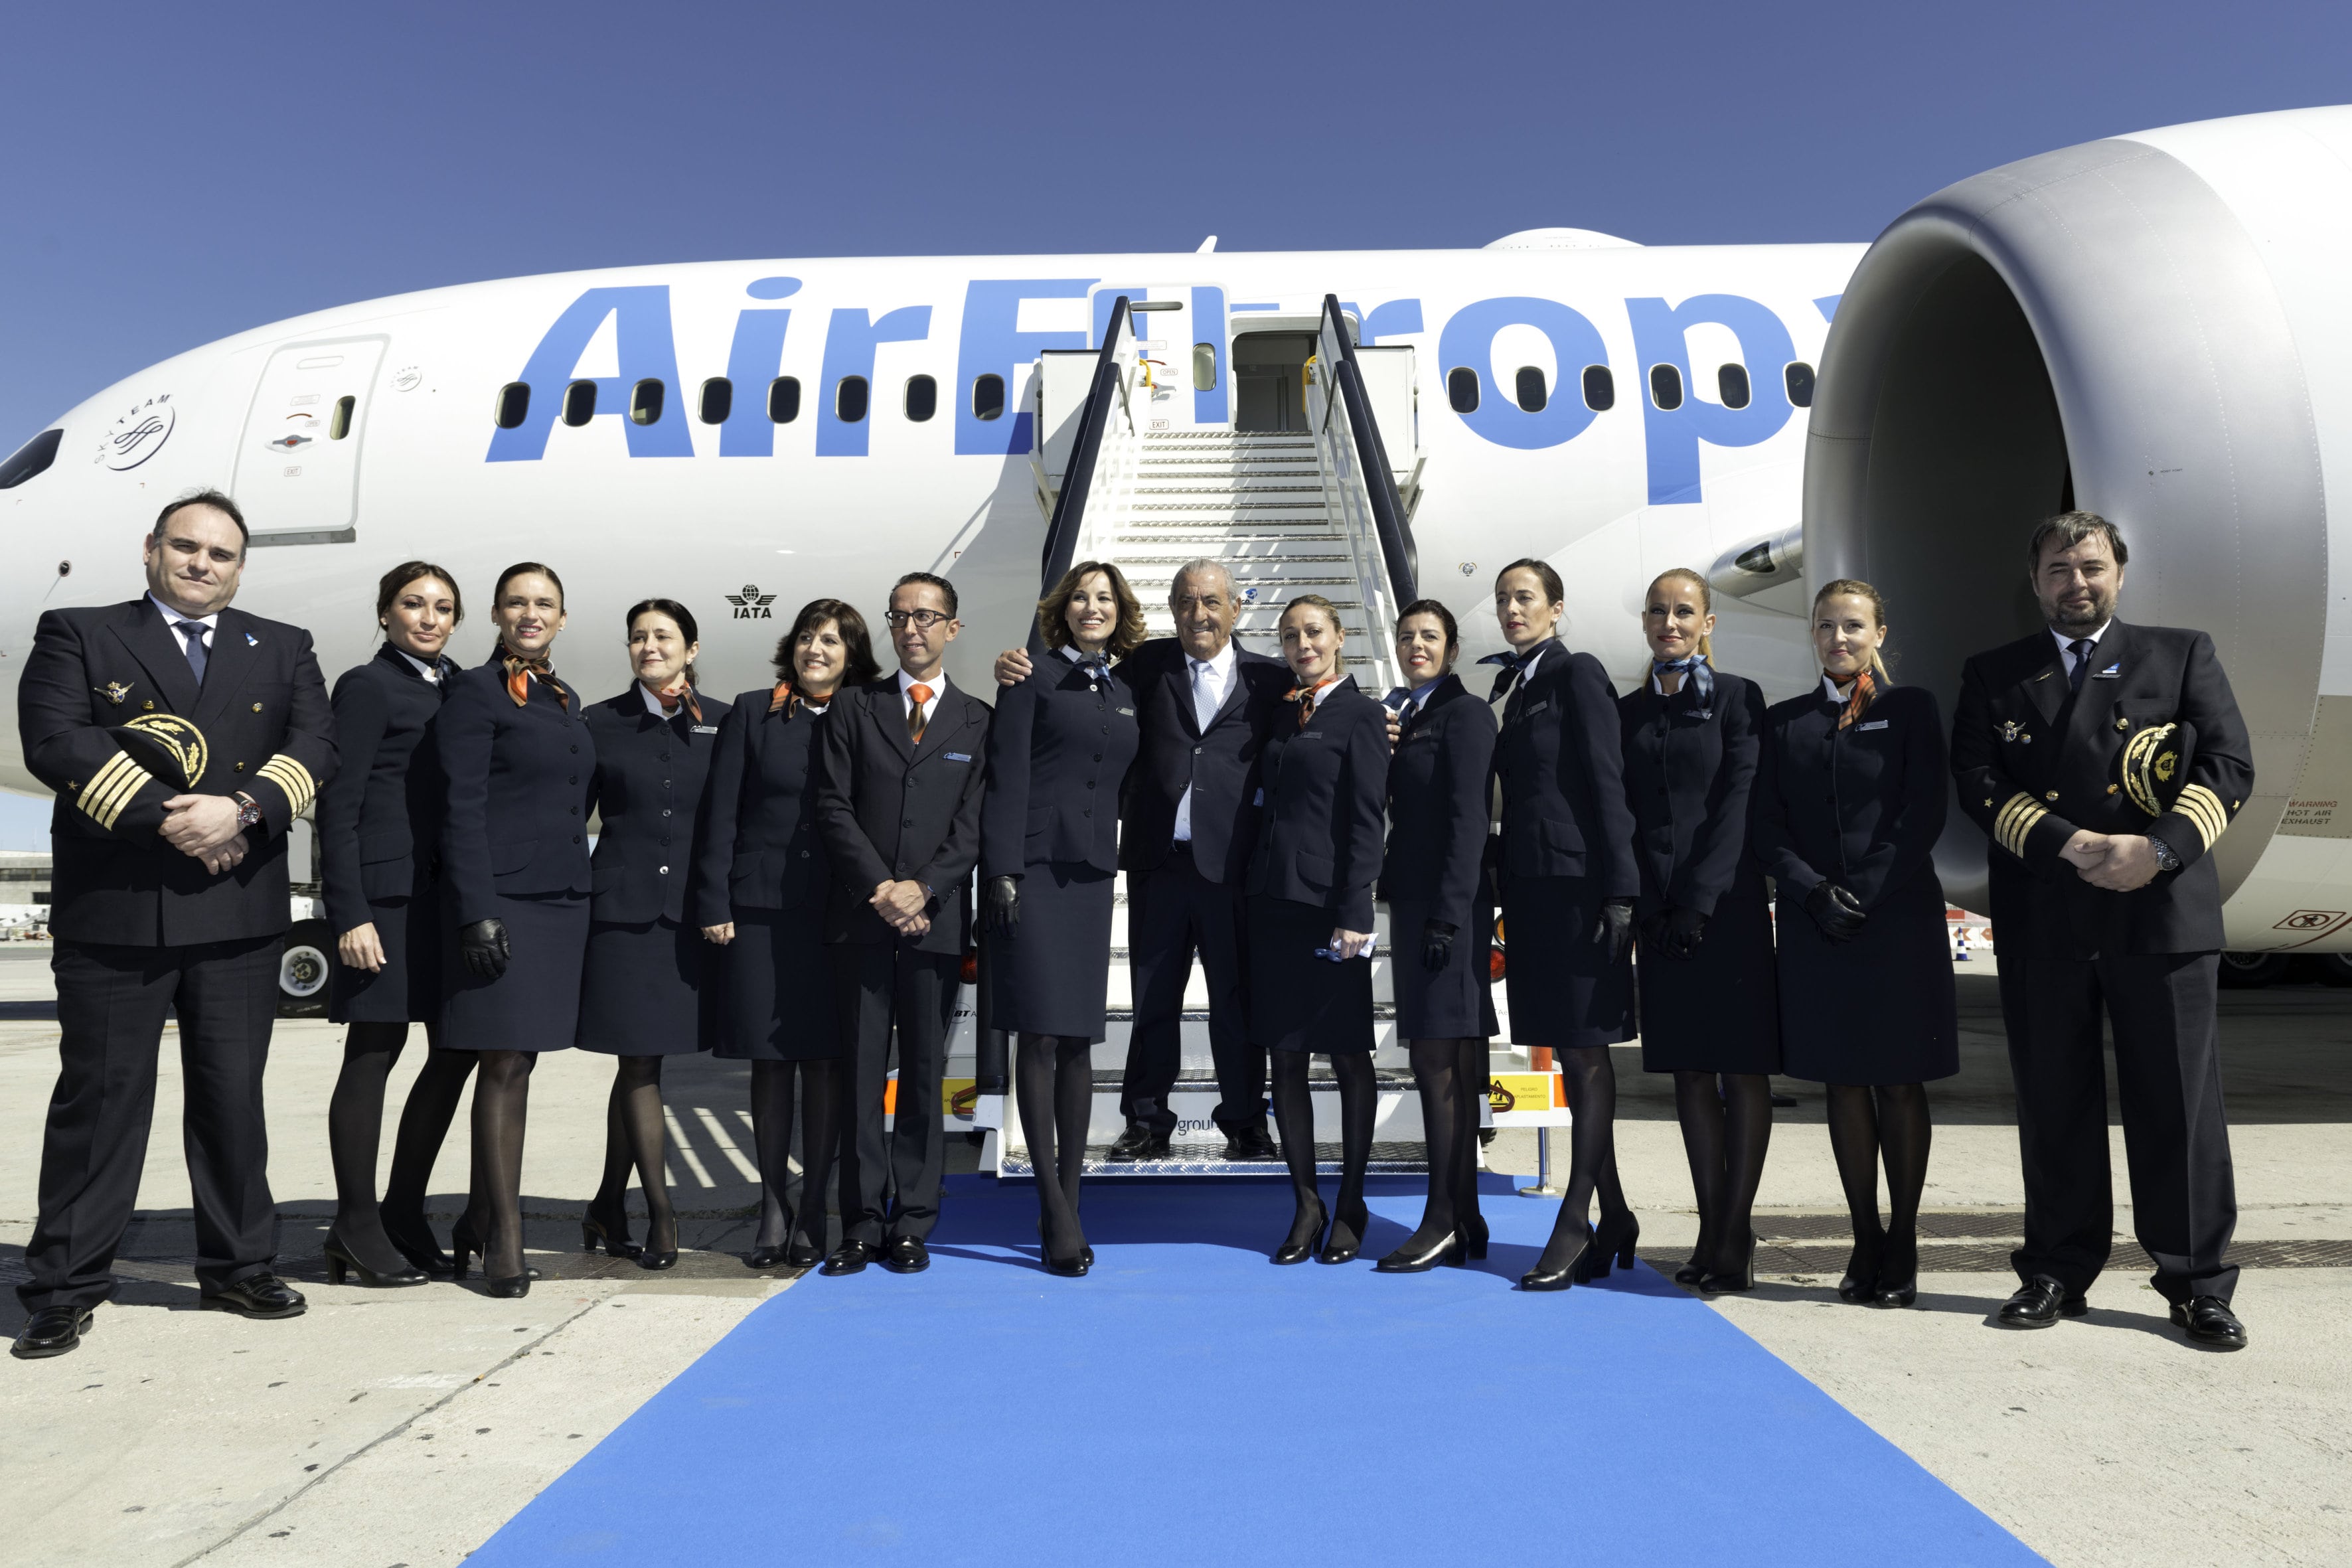 Air Europa B787 and crew